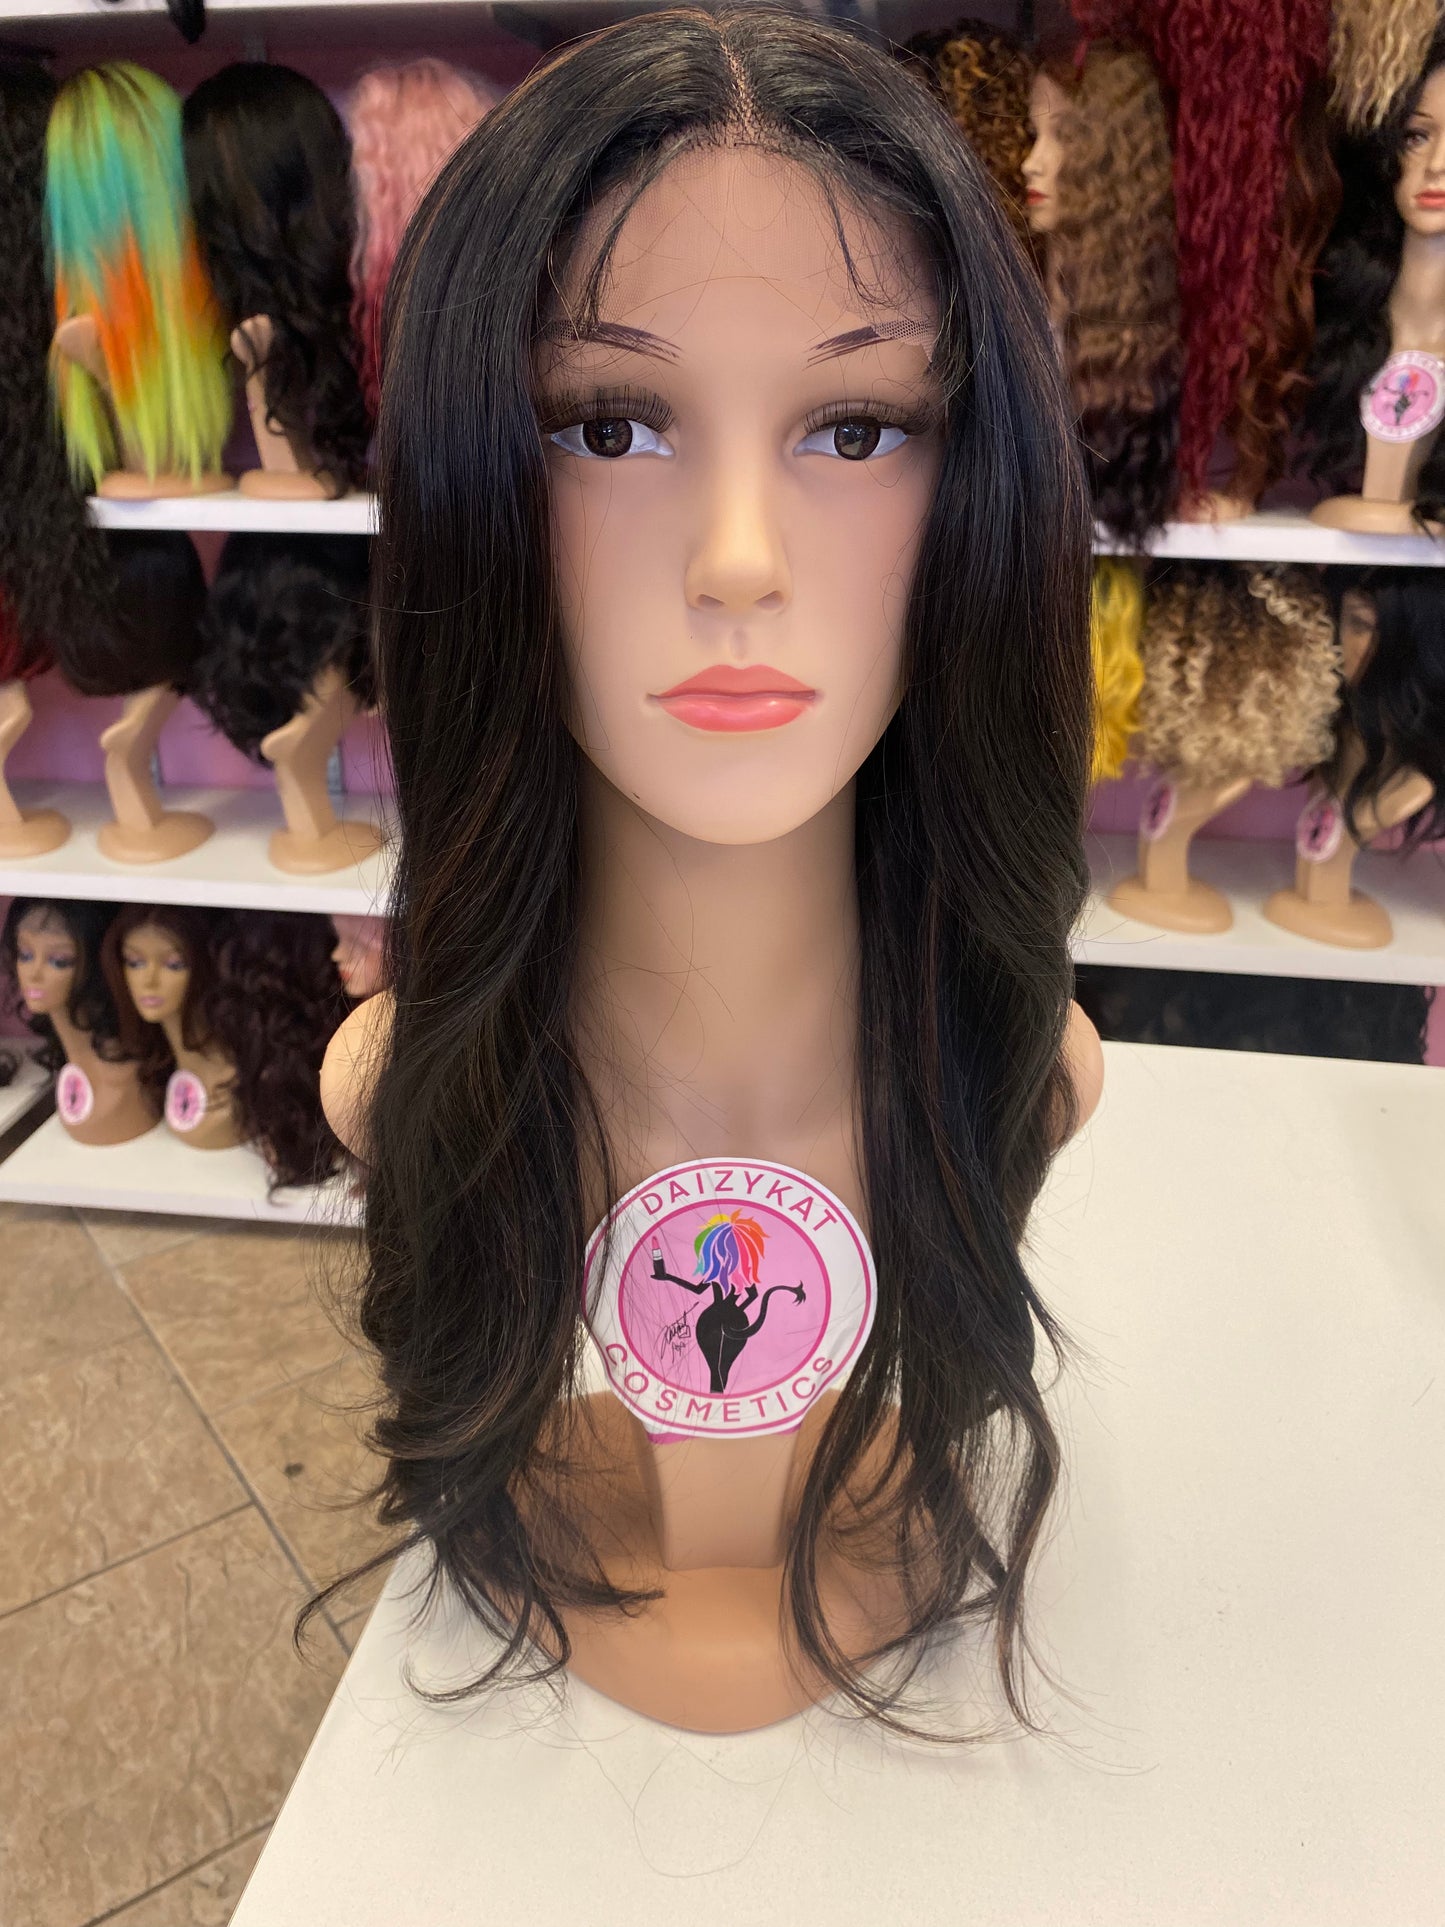 Harper DISPLAY - Middle Part Lace Front Wig - 1B/30 - DaizyKat Cosmetics Harper DISPLAY - Middle Part Lace Front Wig - 1B/30 DaizyKat Cosmetics Wigs